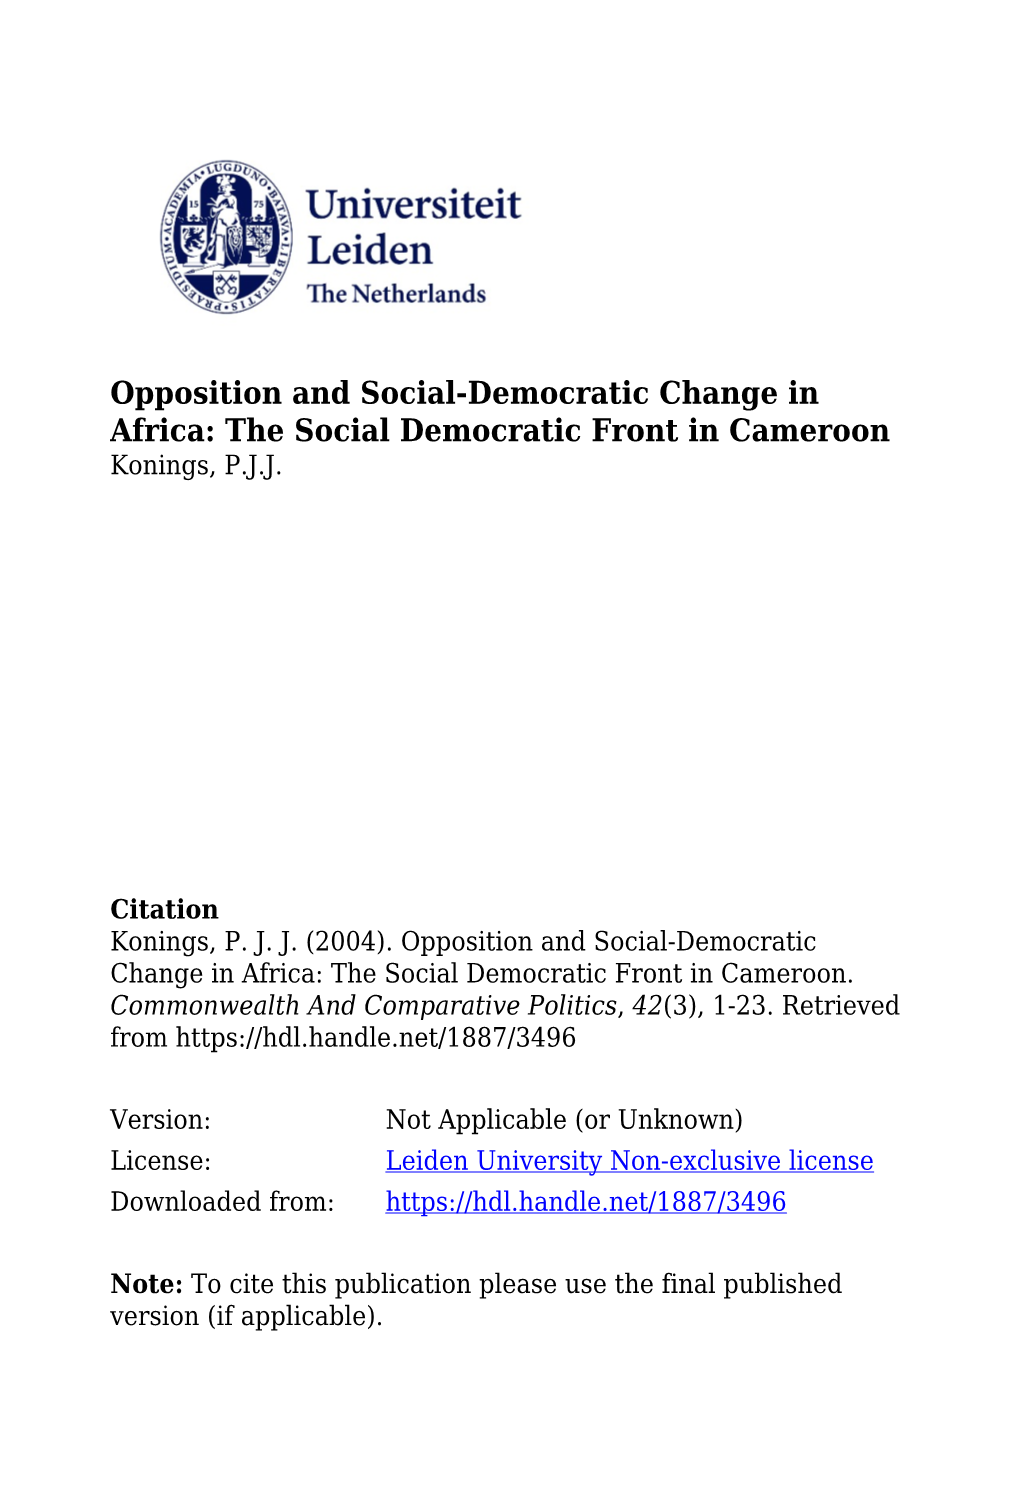 The Social Democratic Front in Cameroon Konings, P.J.J